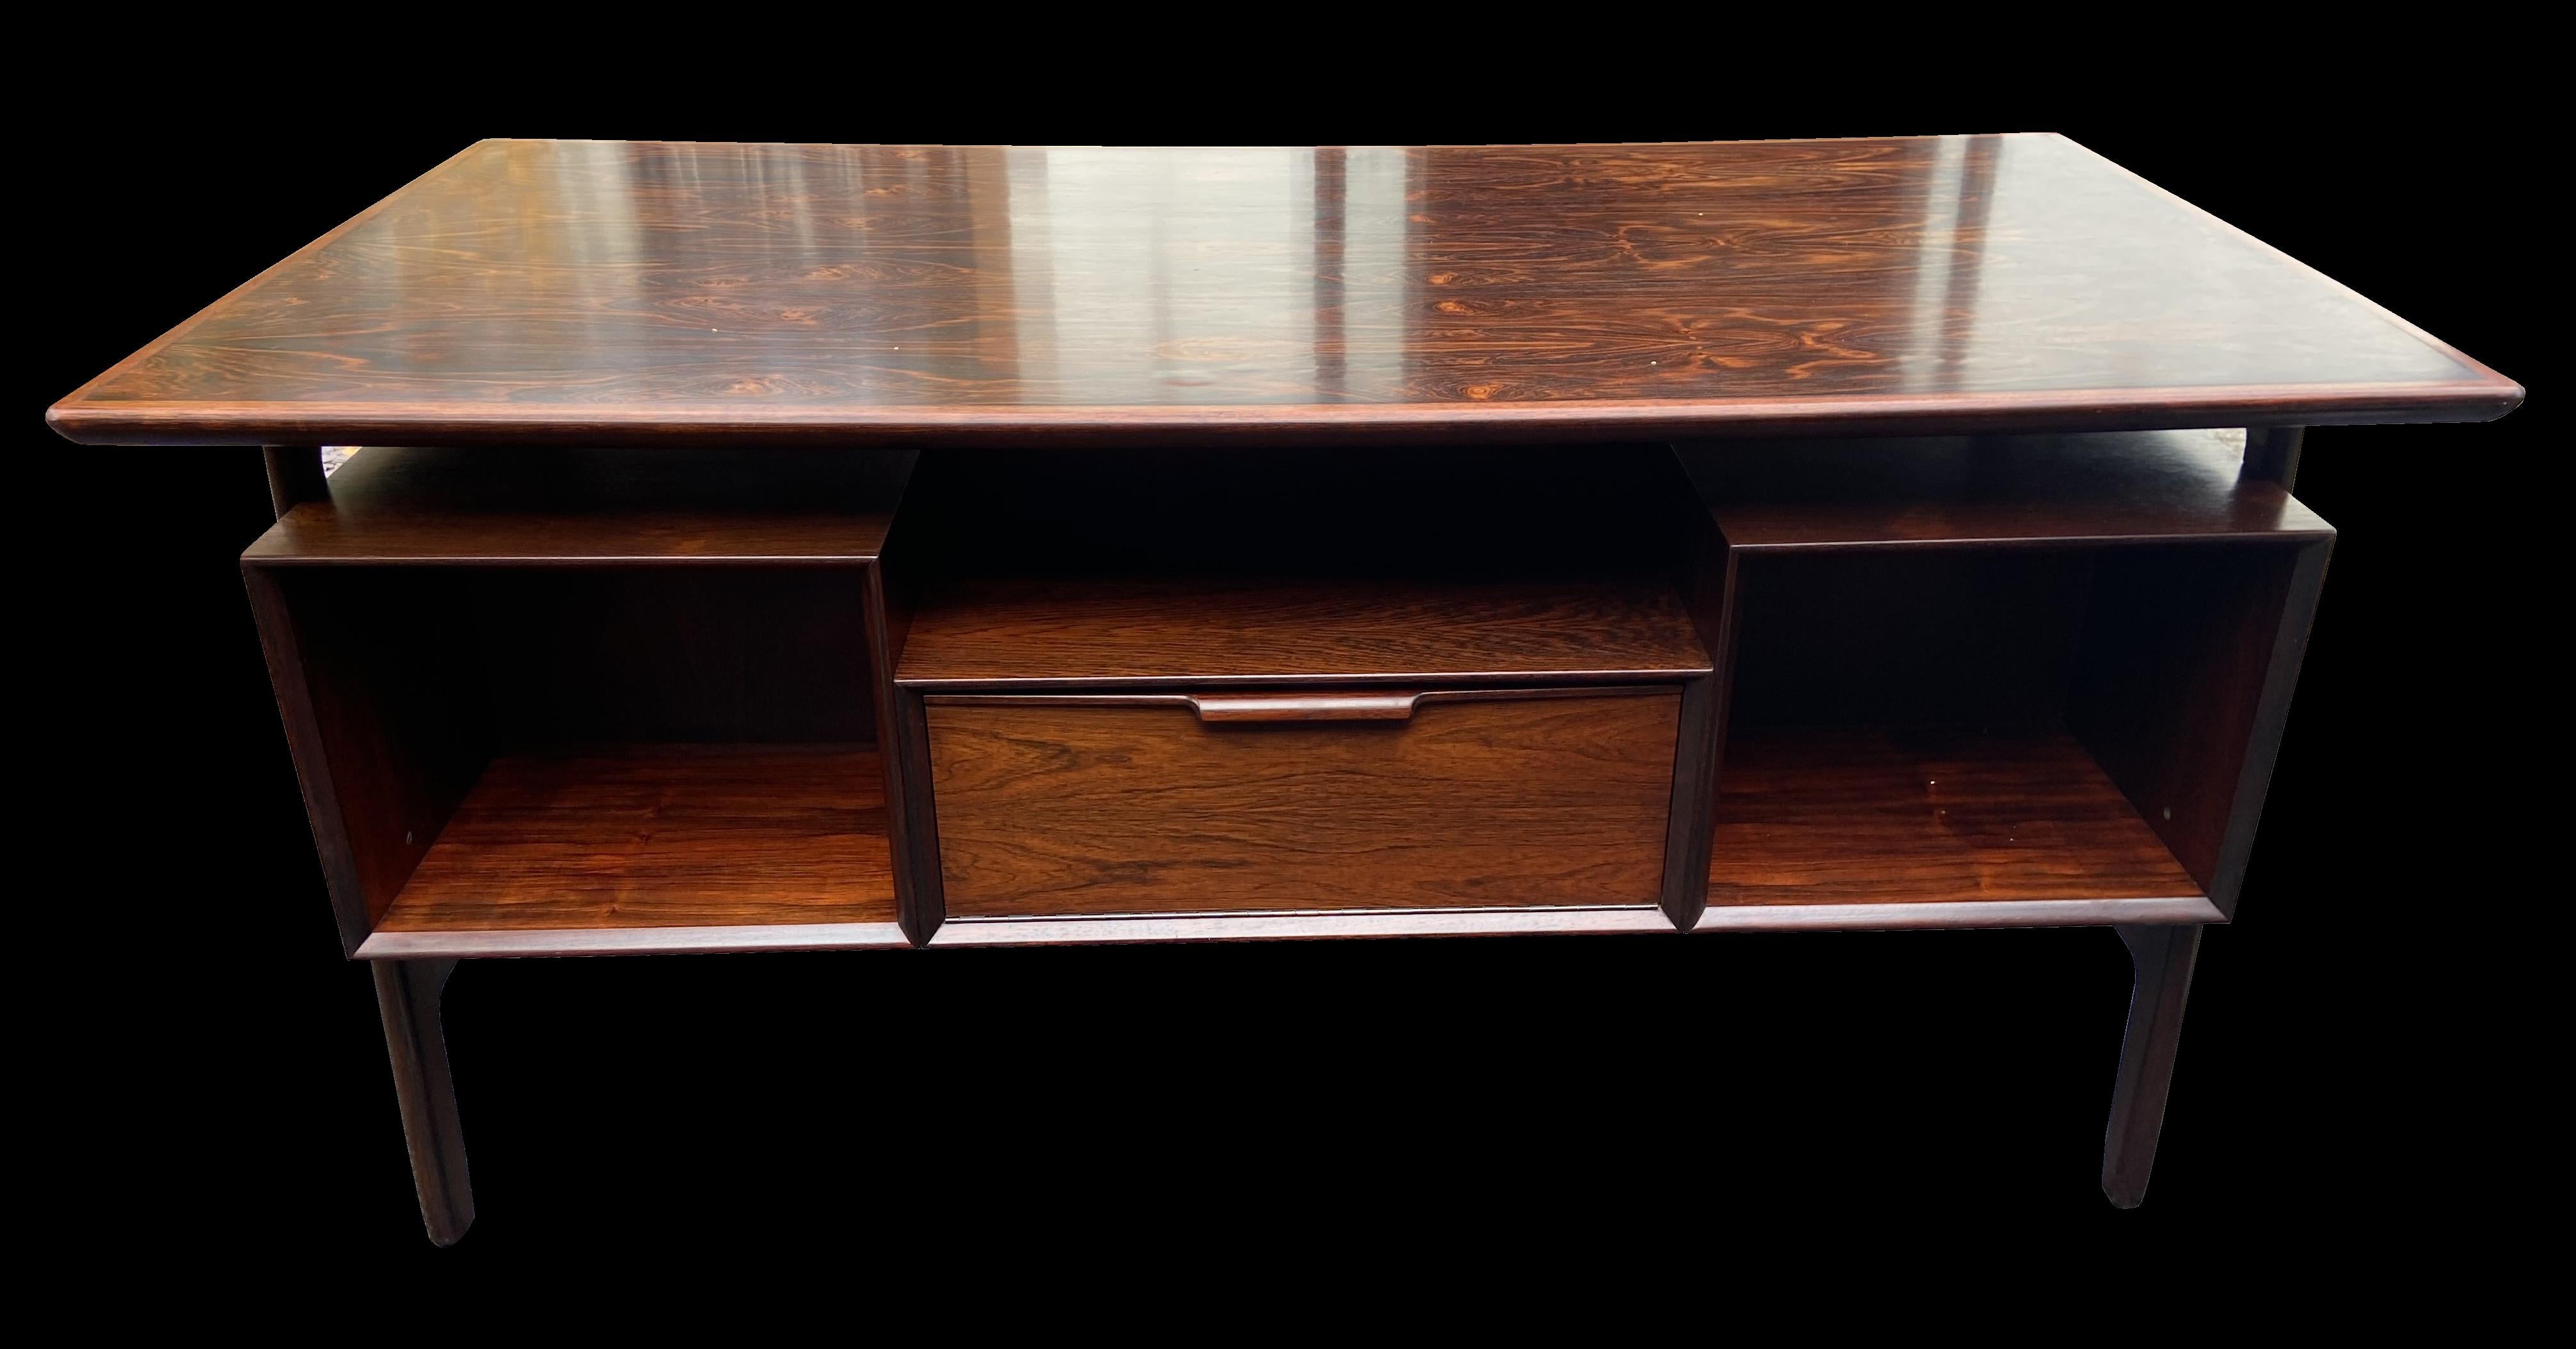 A very nice desk with six drawers on one side and open book/file shelves on the back flanking a drop down flap, in Santos Rosewood (a species that does not require a cites certificate to import or export), designed by Gunni Omann for Omann Junn